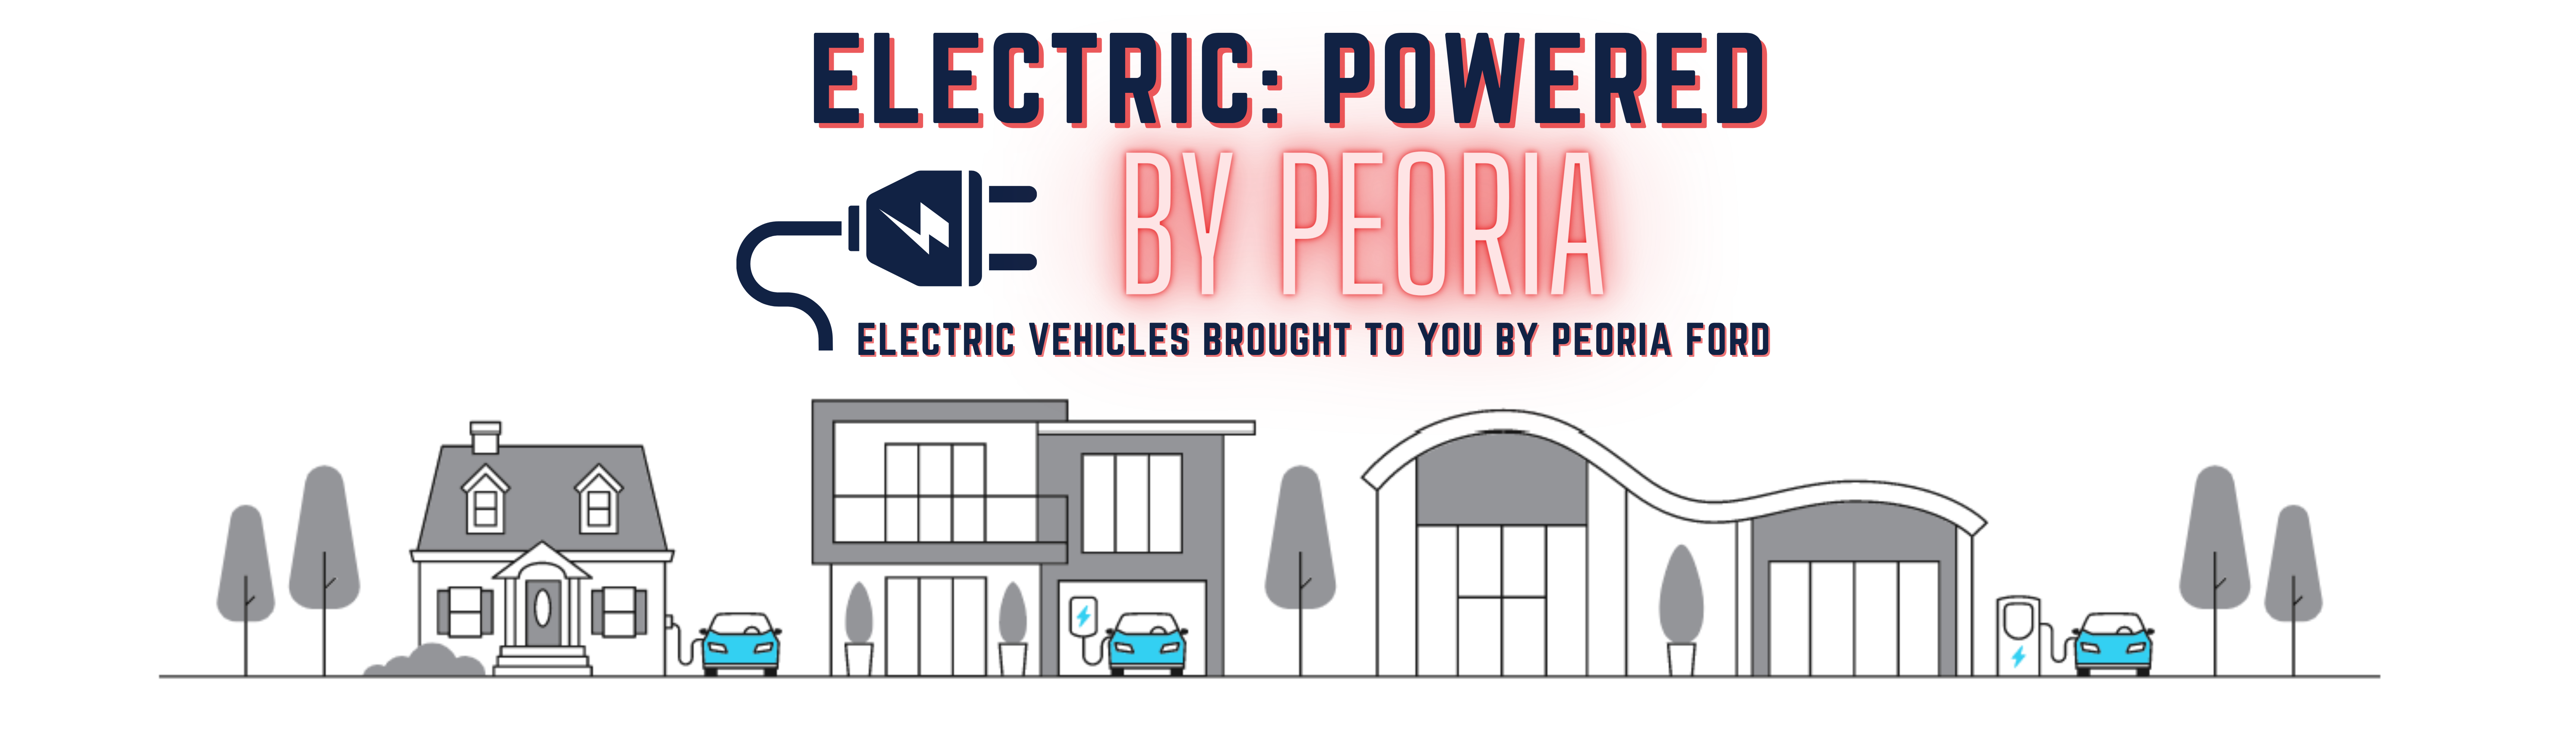 Electric Powered by Peoria; Electric vehicles brought to you by Peoria Ford.